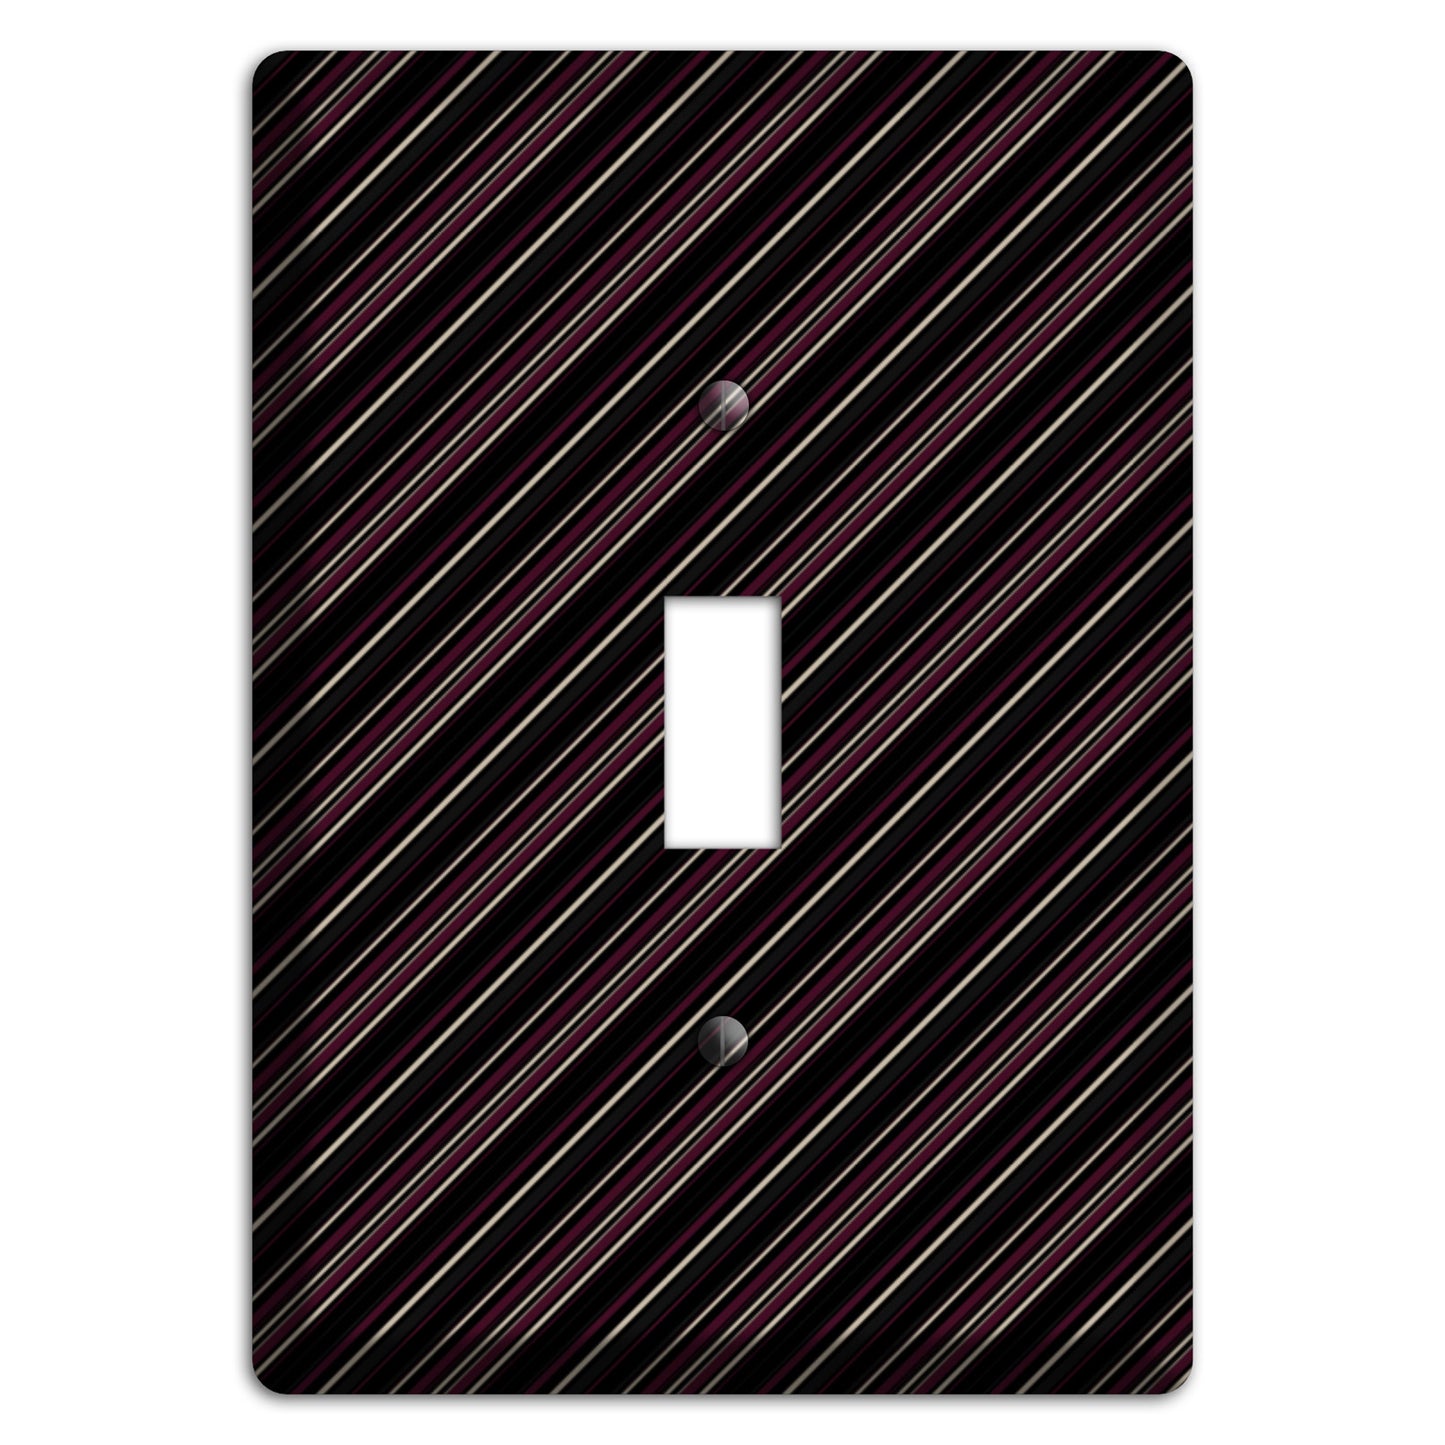 Black with White and Burgundy Angled Pinstripe Cover Plates